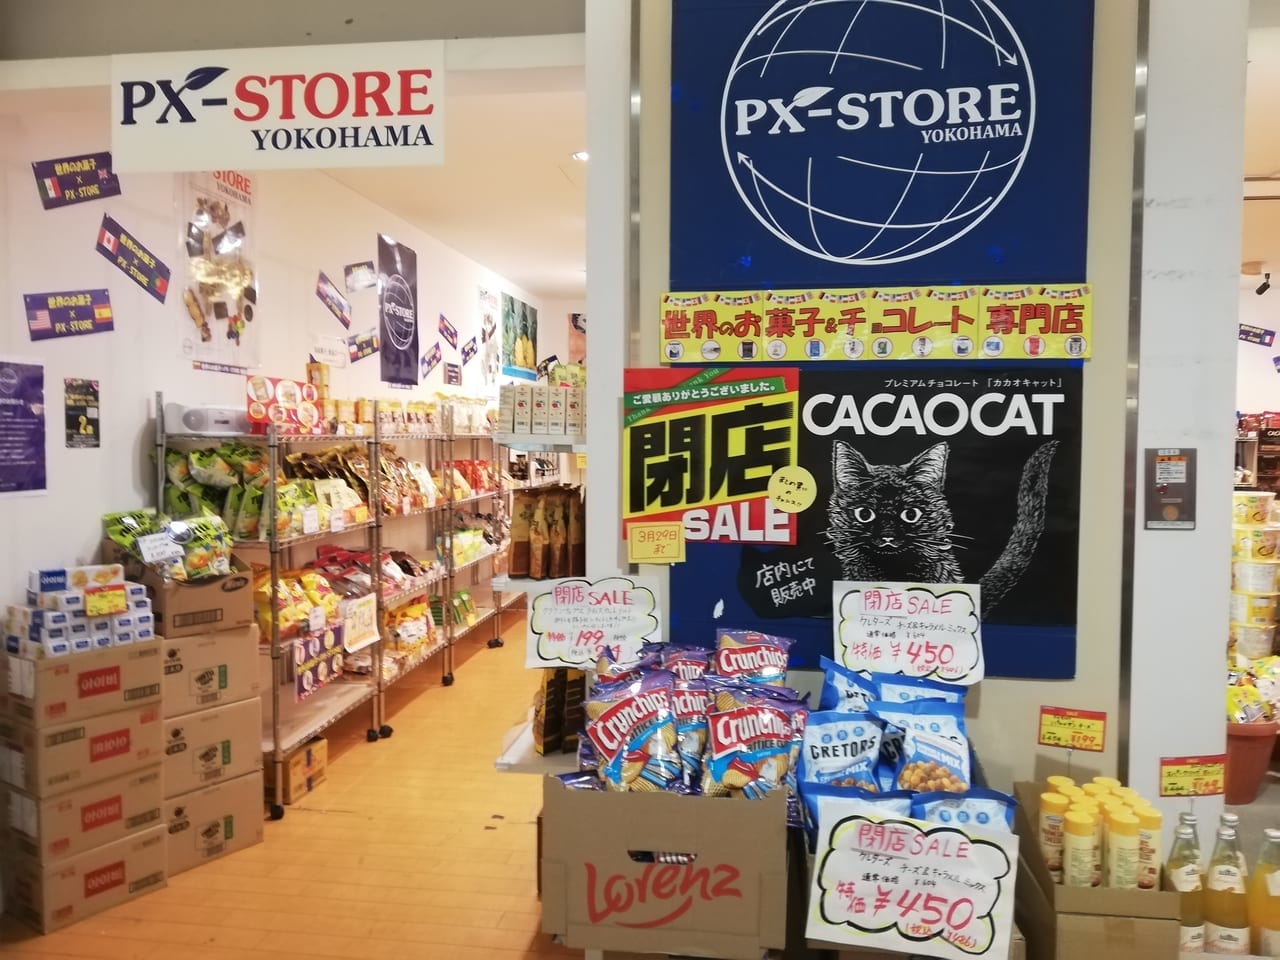 PX-STORE